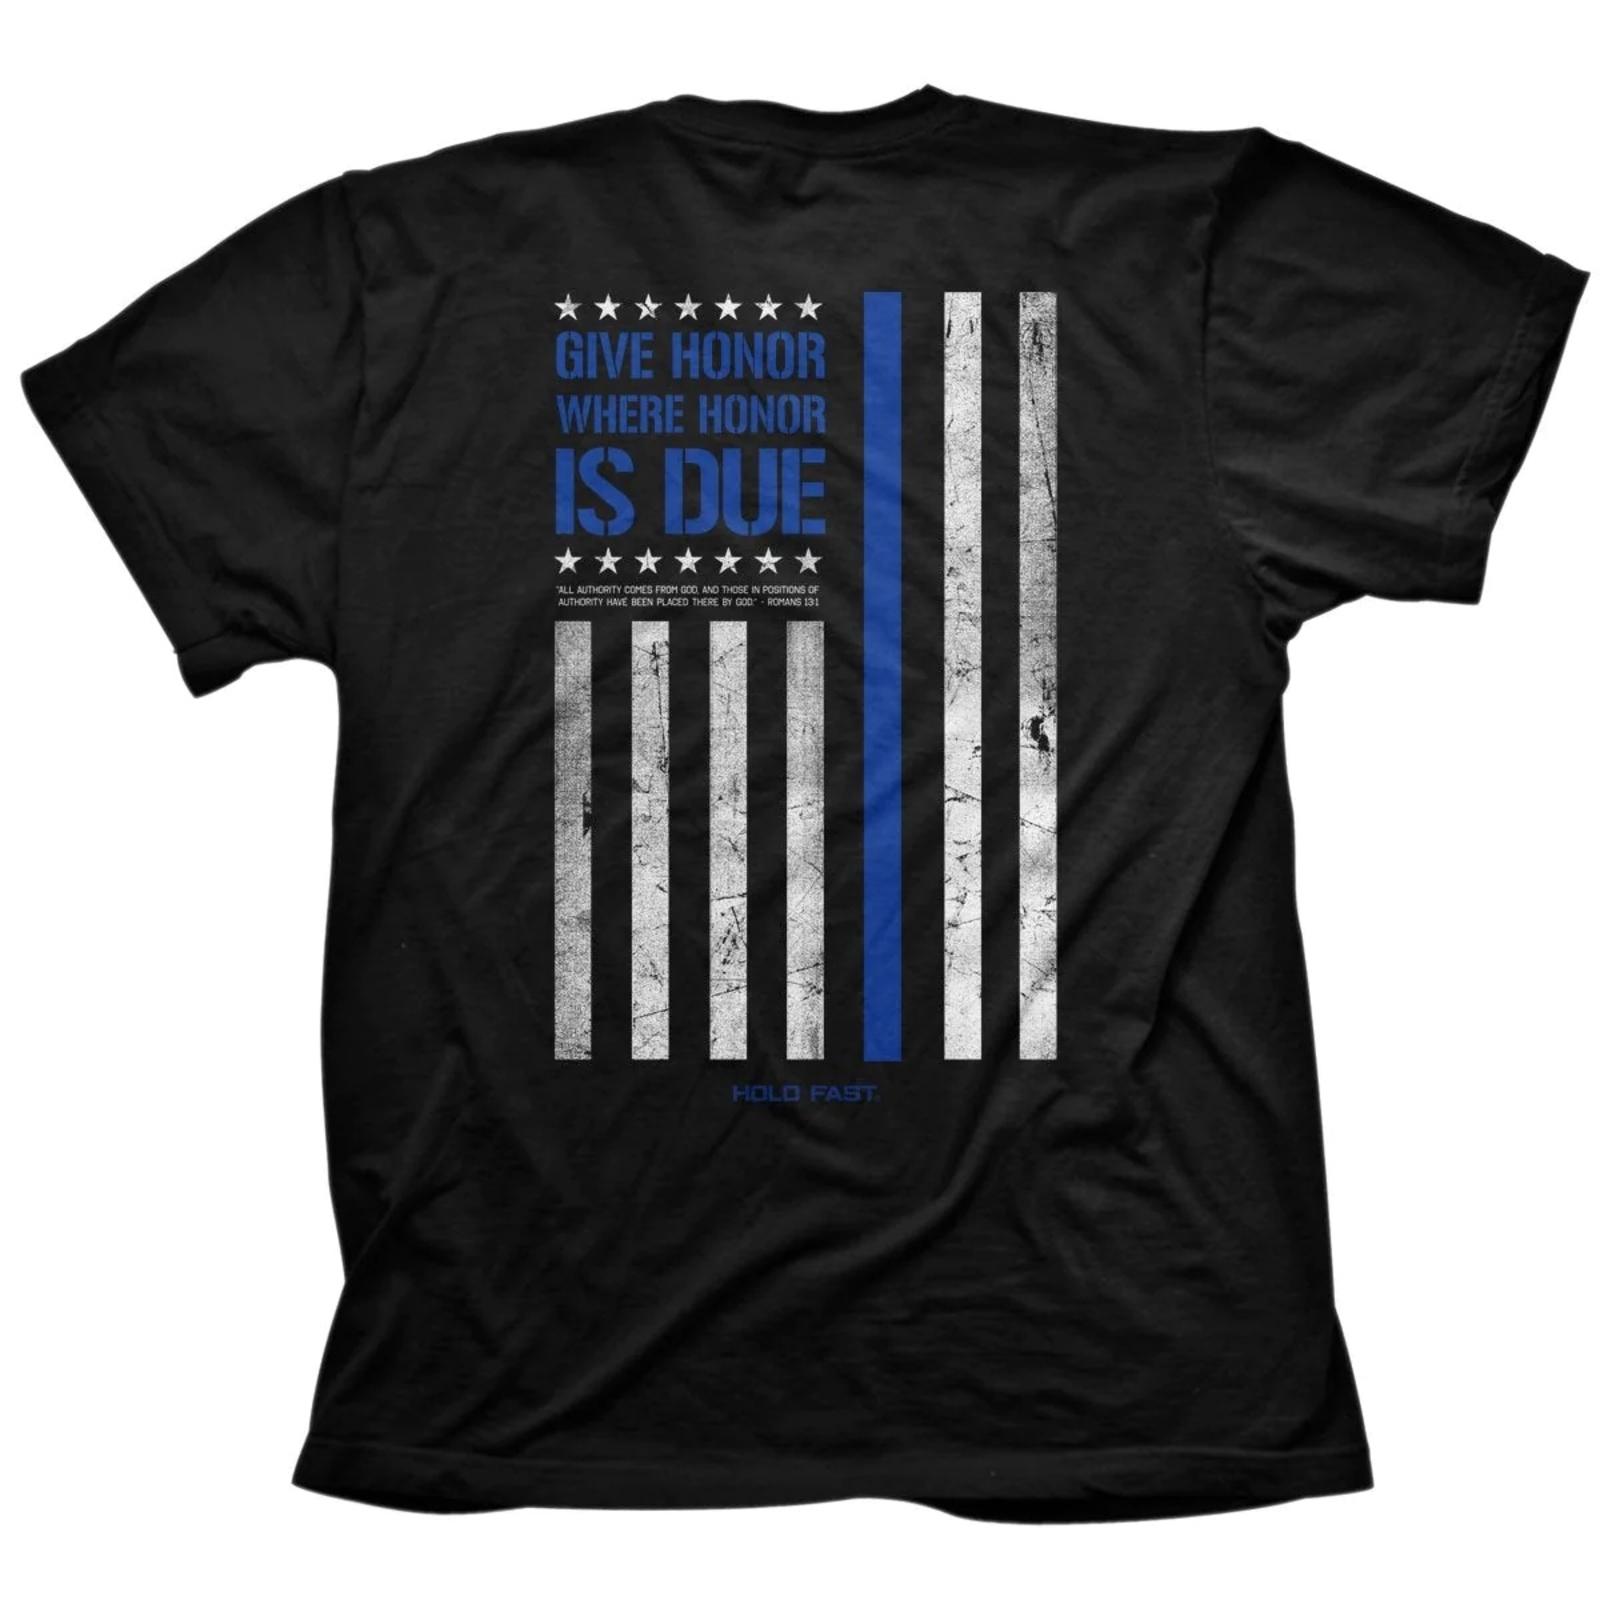 Kerusso Police Flag T-Shirt in Black by HOLD FAST®